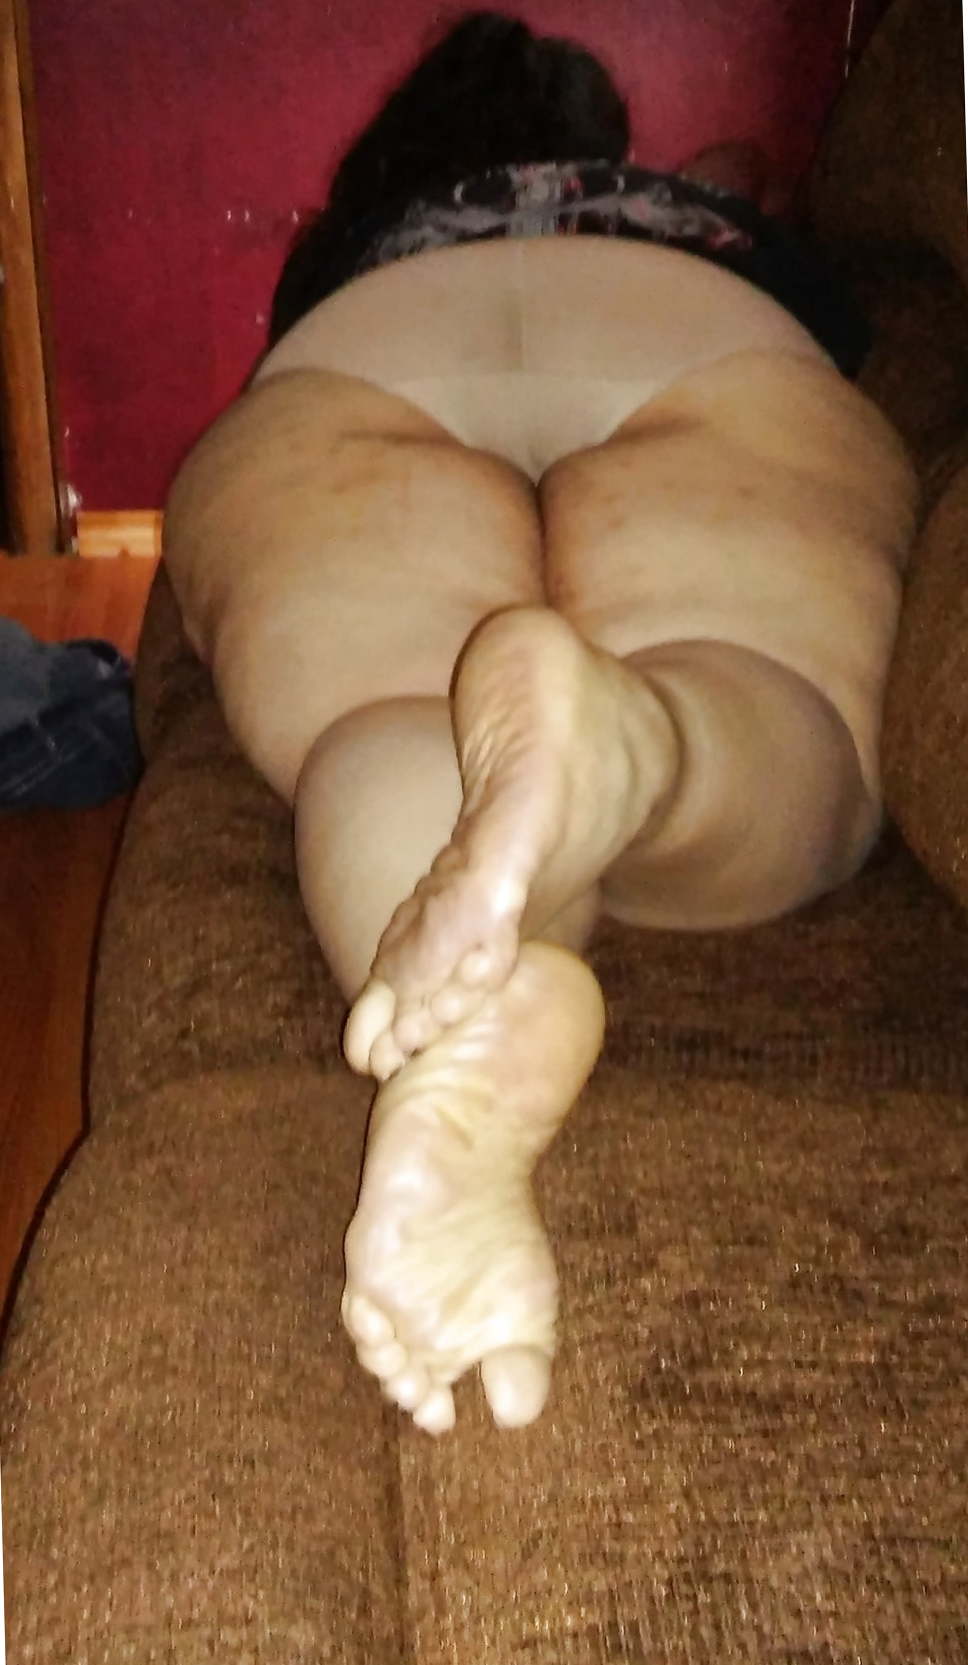 My bbc enjoying wifes humungous ass and fabulous soles